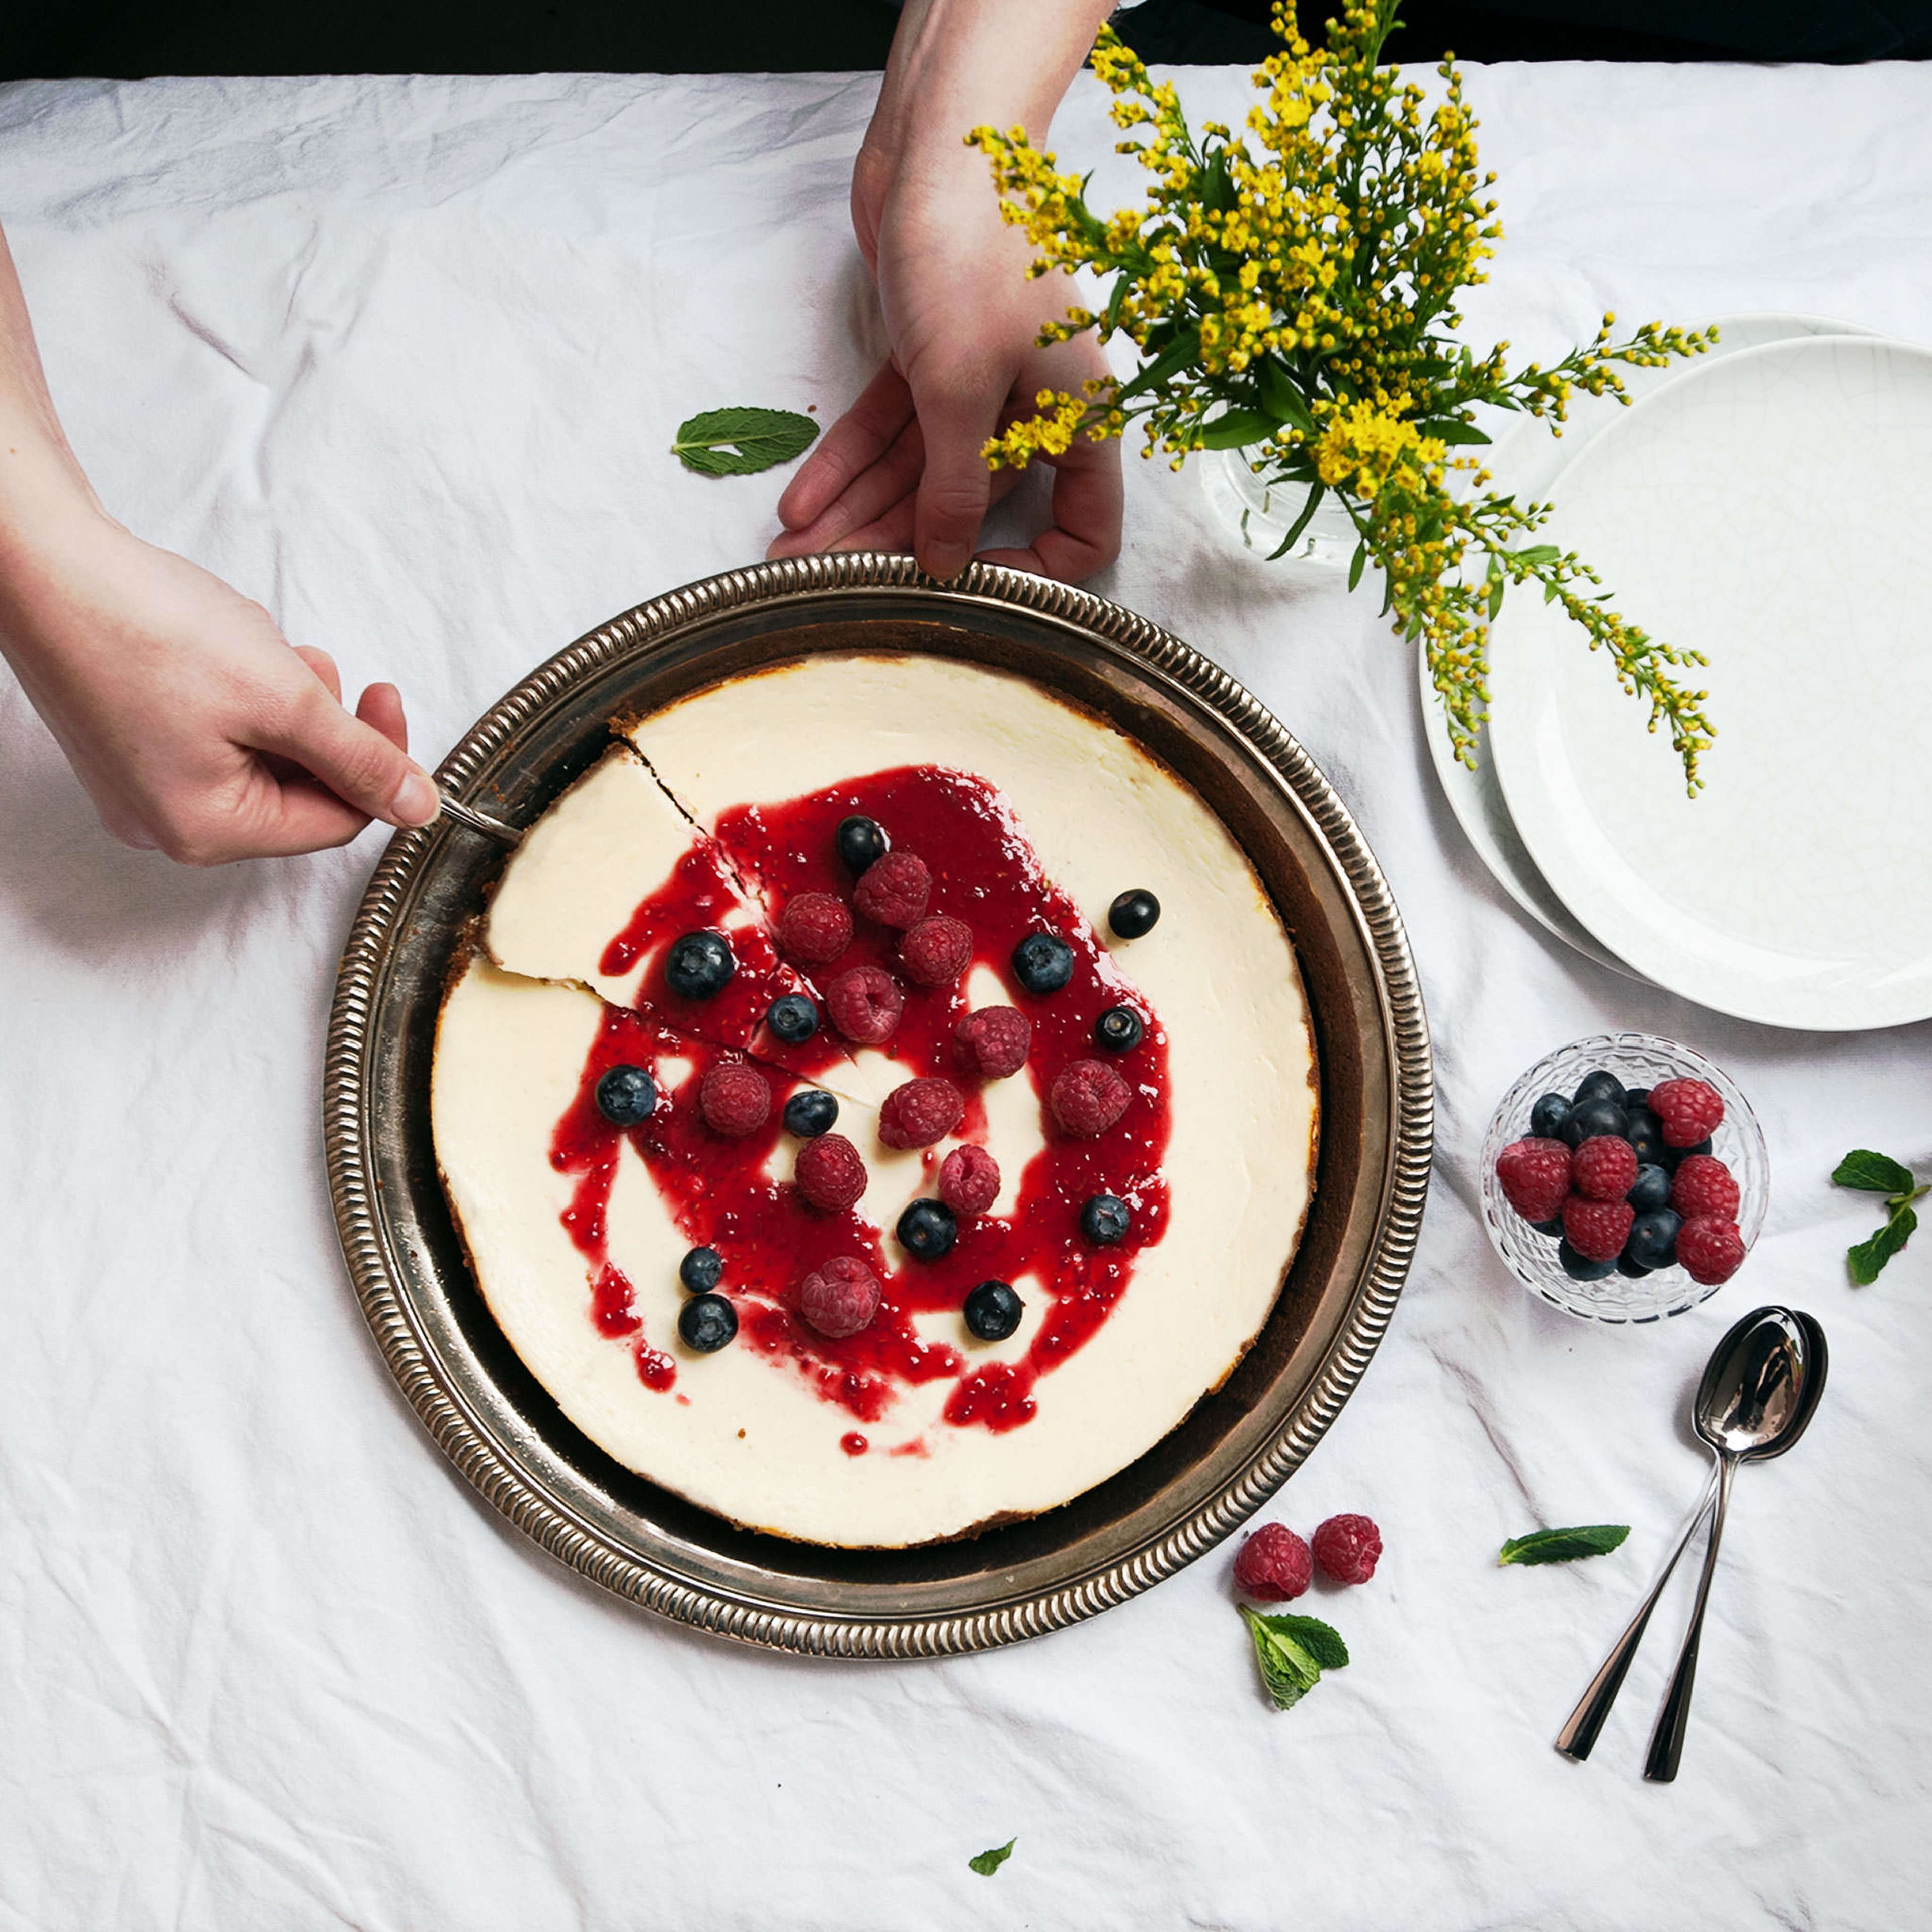 5 Reasons to Say “Yes!” to Cheesecake